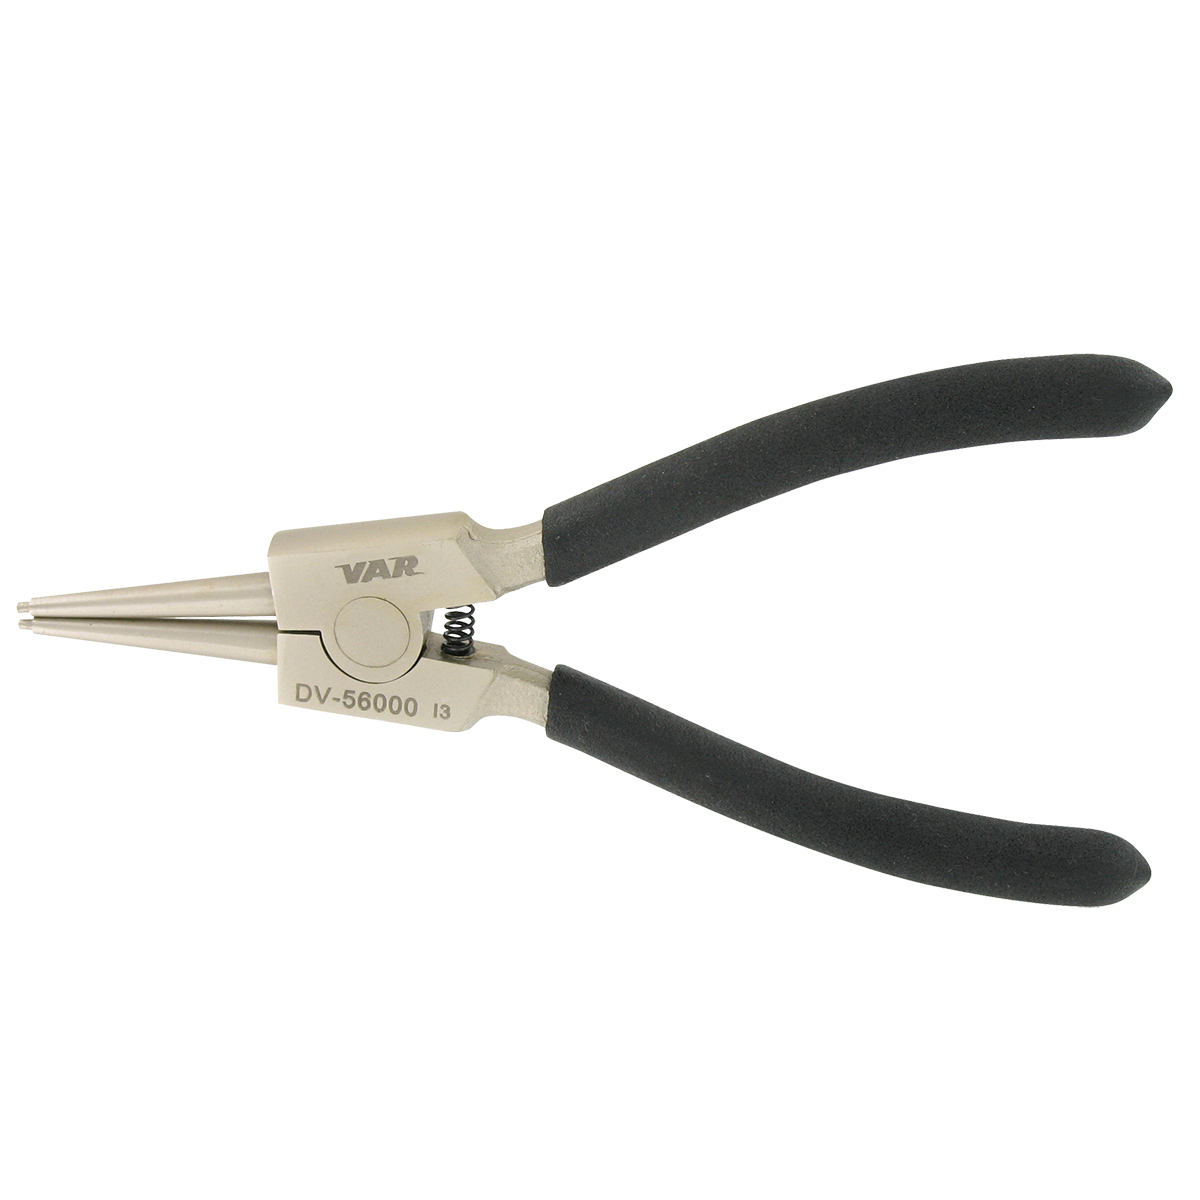 Circlips pliers, outer